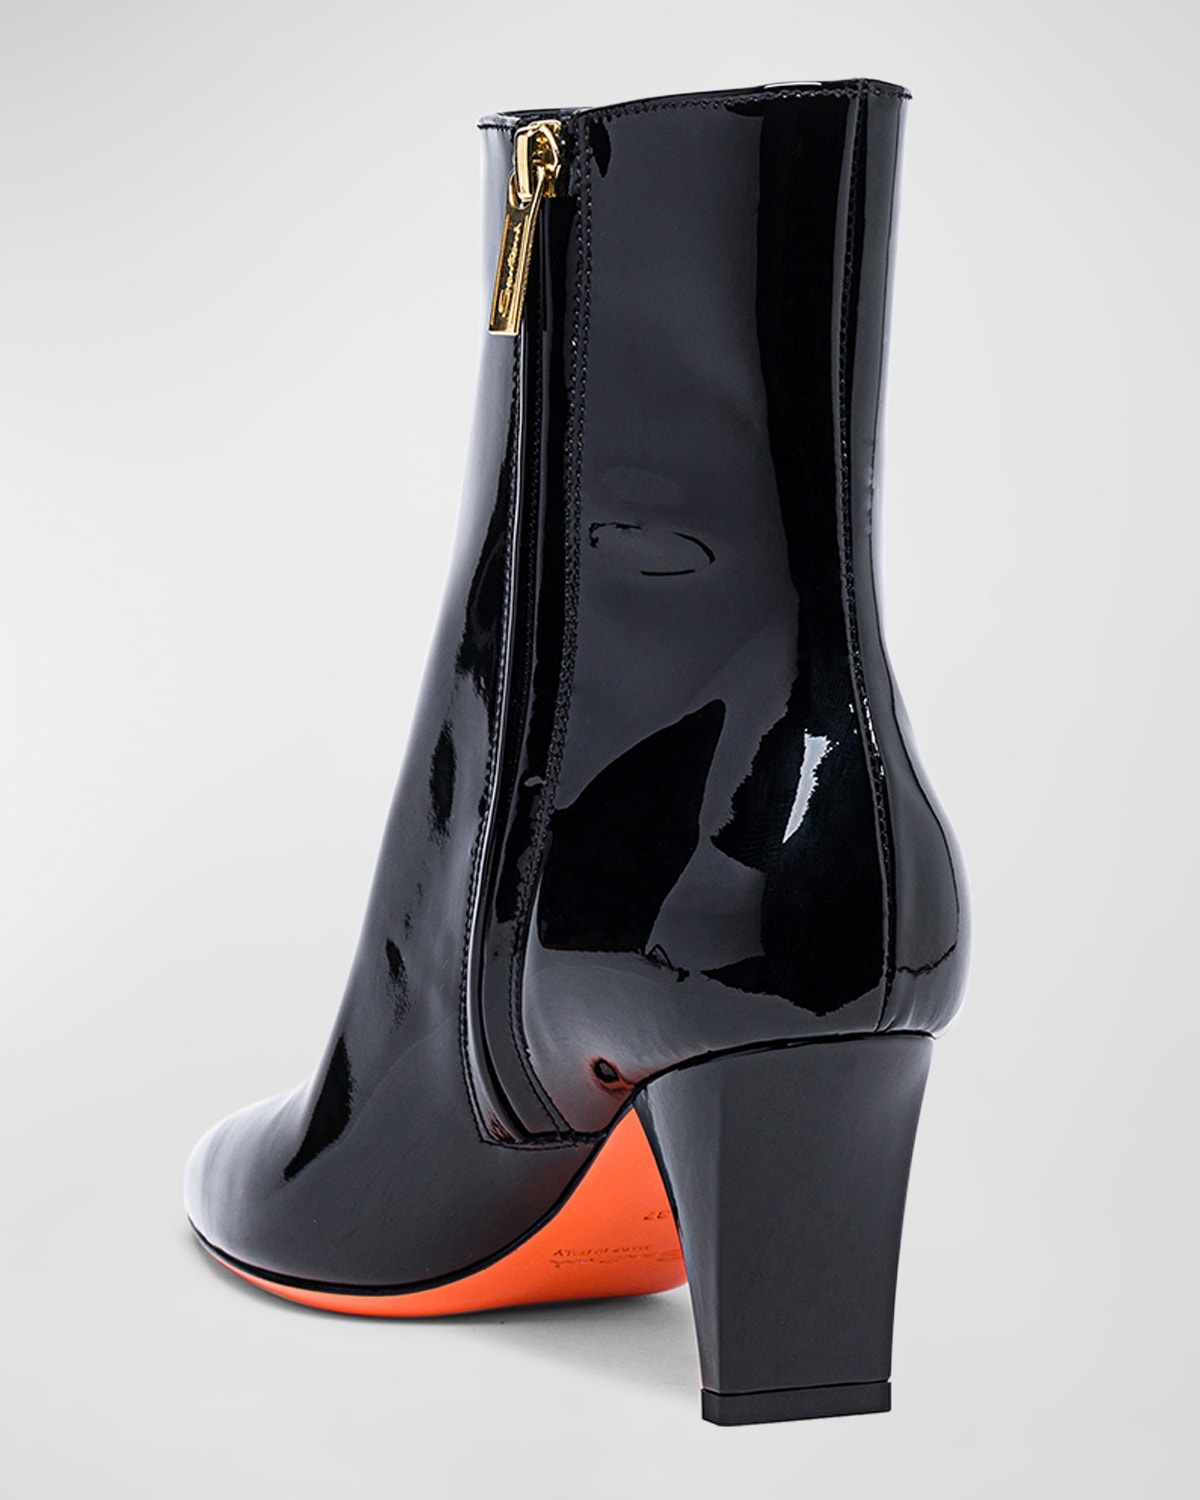 Delfica Patent Leather Booties - 3